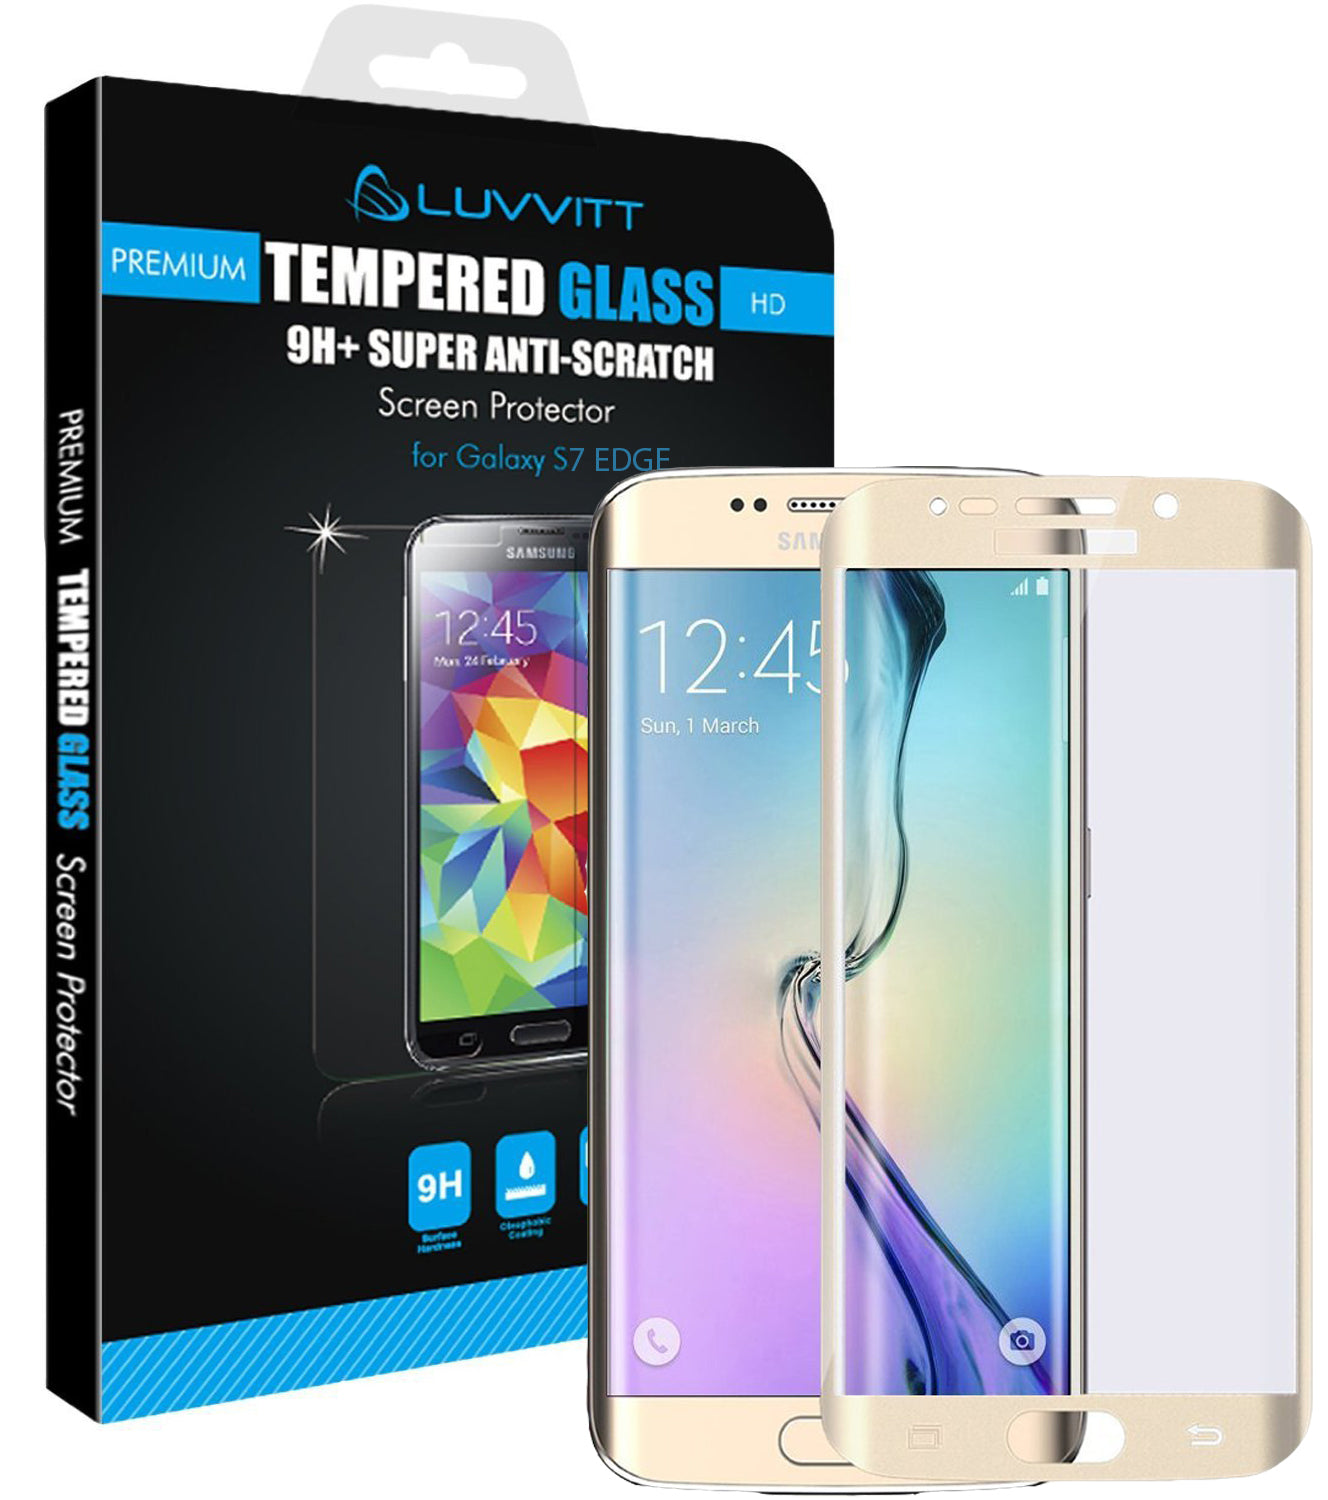 LUVVITT TEMPERED GLASS Screen Protector for Samsung Galaxy S7 Edge - Gold